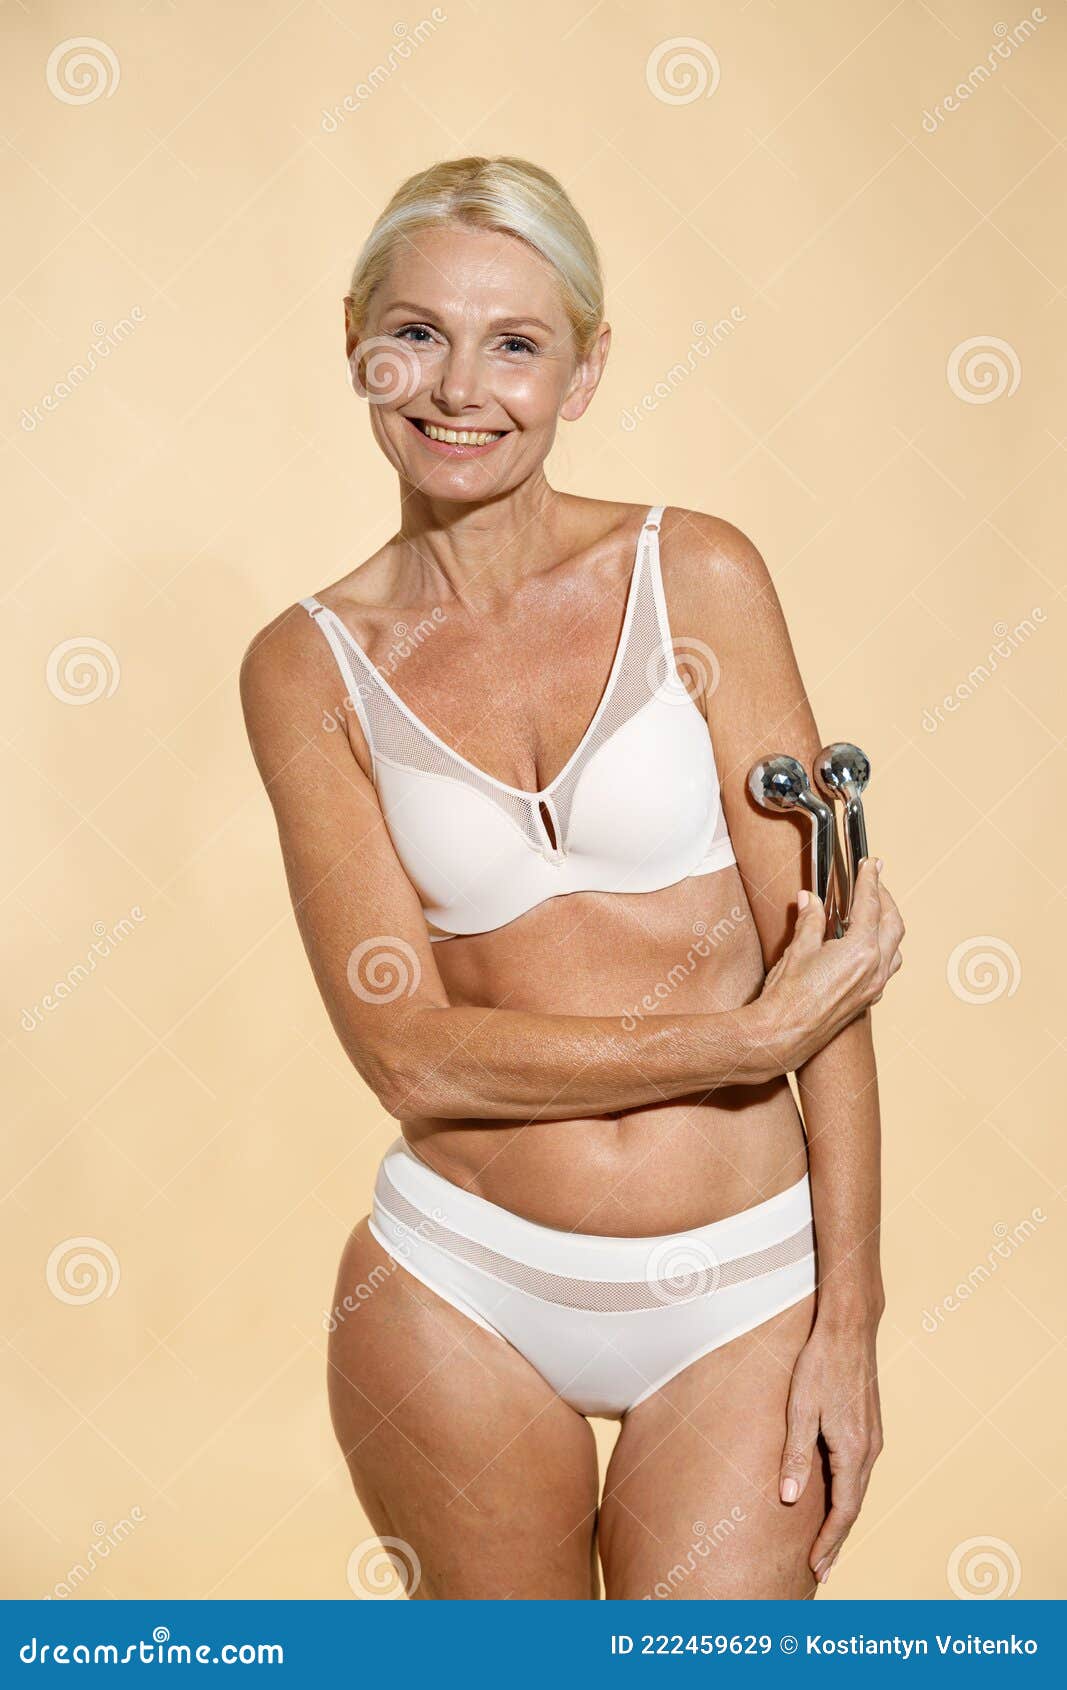 Middle-aged woman posing wearing a blue t-shirt and panties stock photo